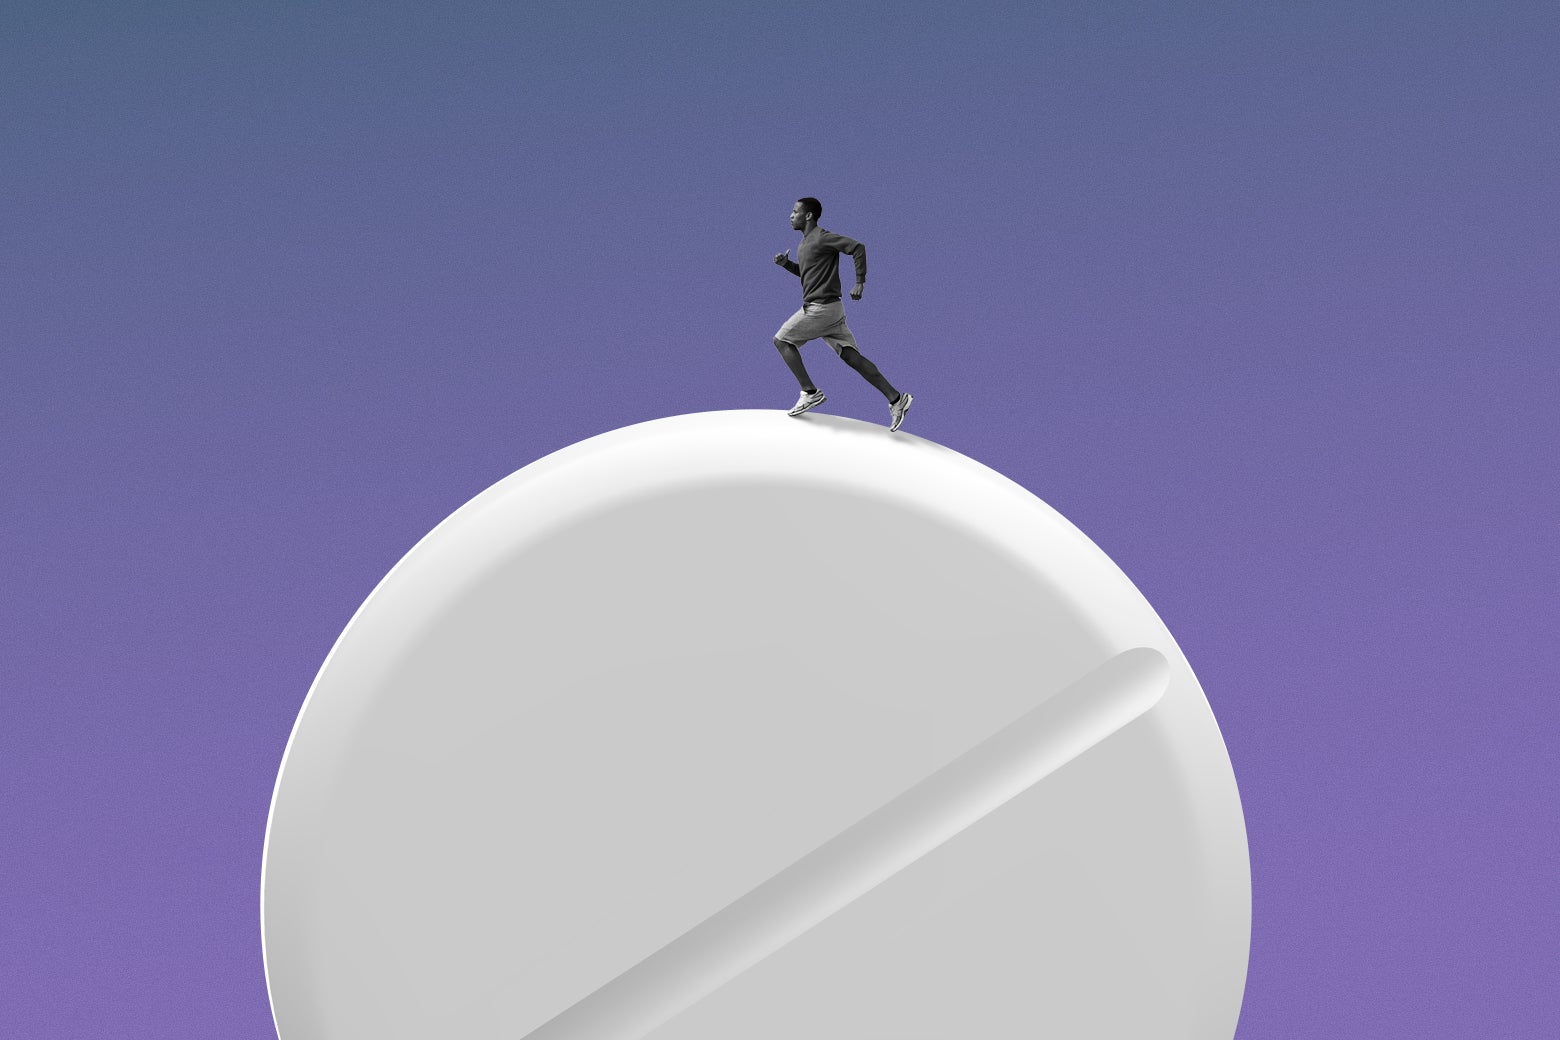 Is Running Really Better for Depression Than Medication?